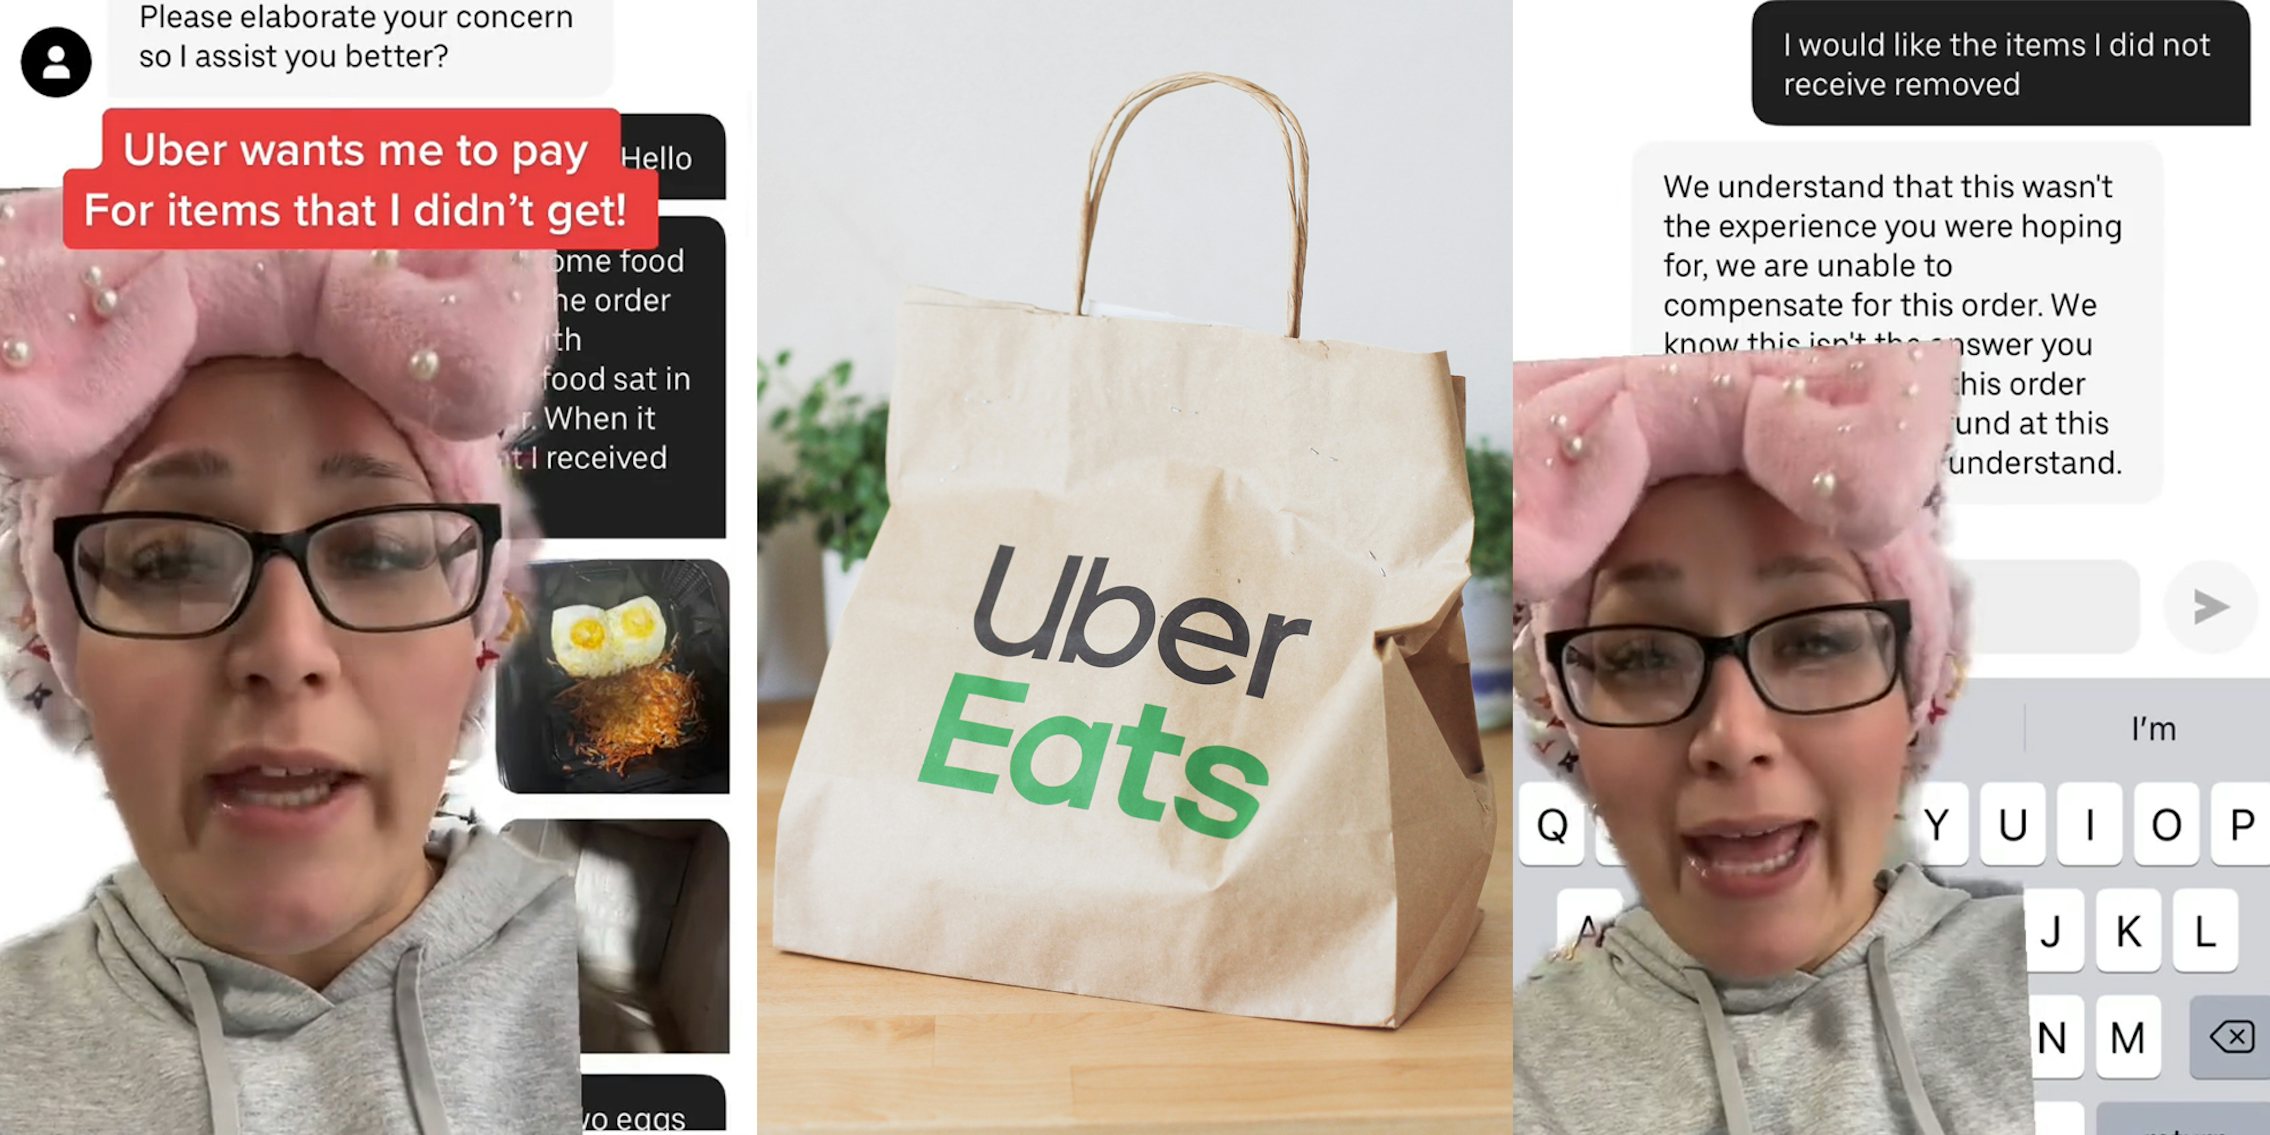 Customer Says Uber Eats Refuses To Refund Incomplete Order